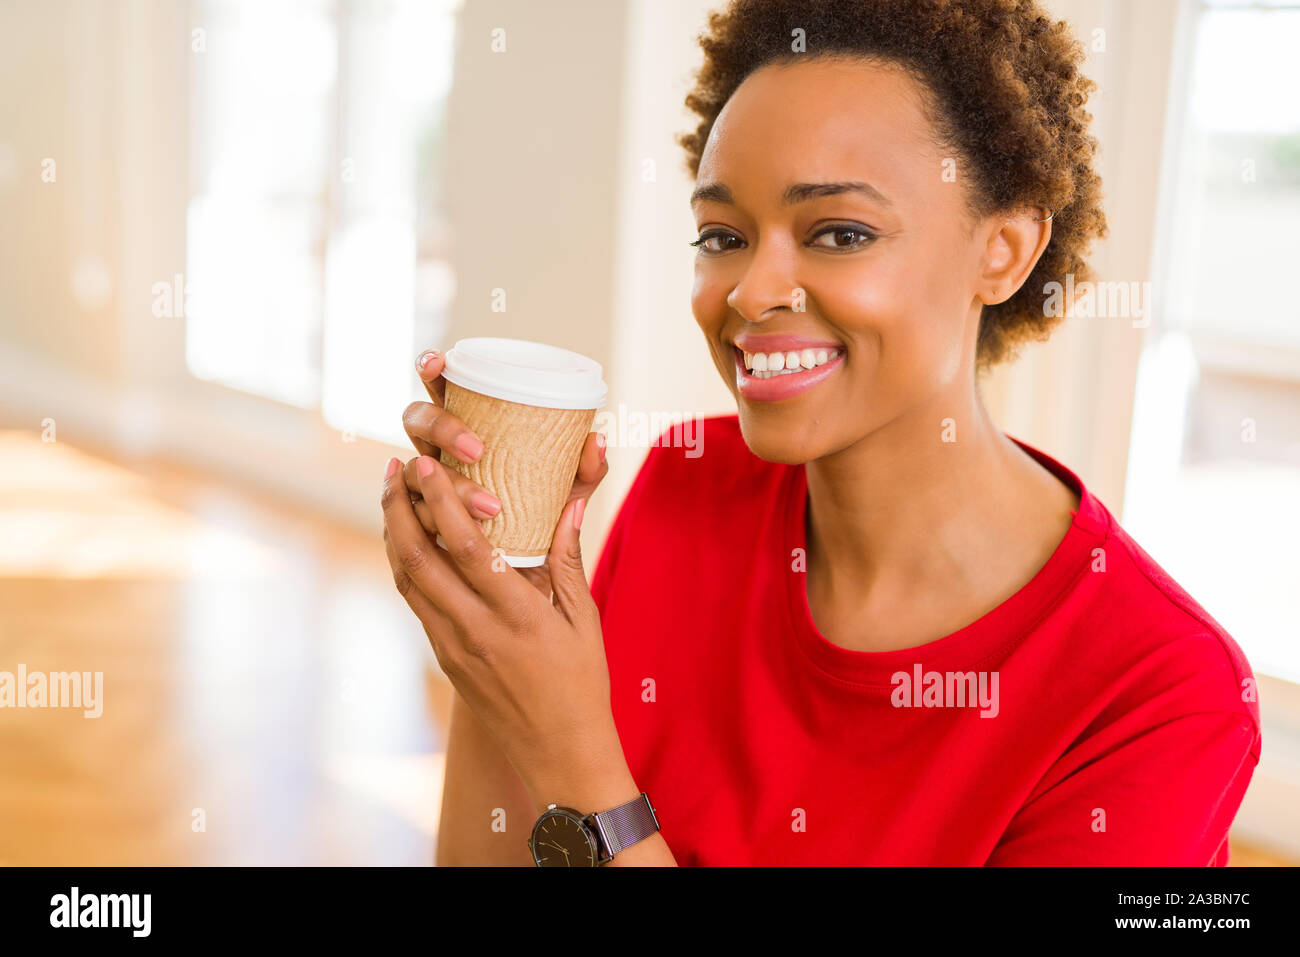 https://c8.alamy.com/comp/2A3BN7C/beautiful-young-african-american-woman-drinking-a-coffee-in-a-take-away-paper-cup-2A3BN7C.jpg